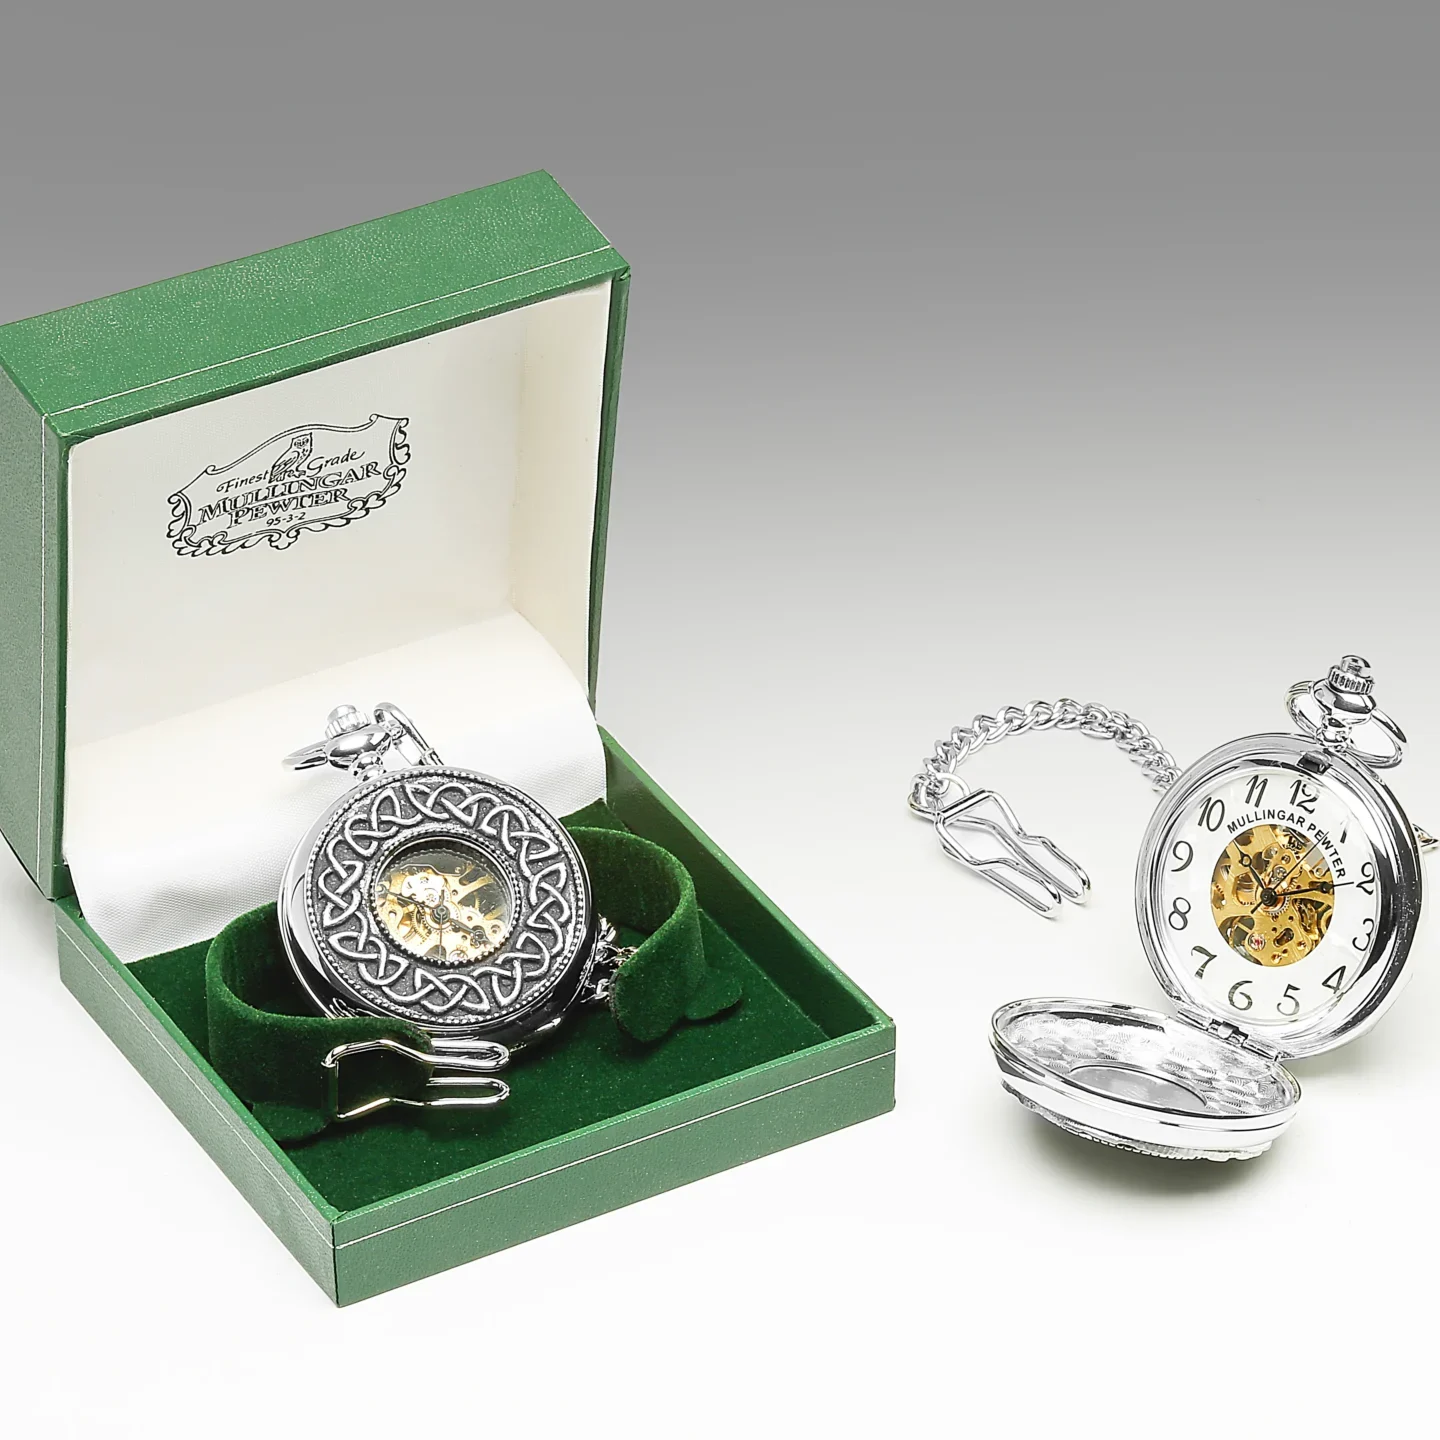 A silver pocket watch with a chain in it's box.